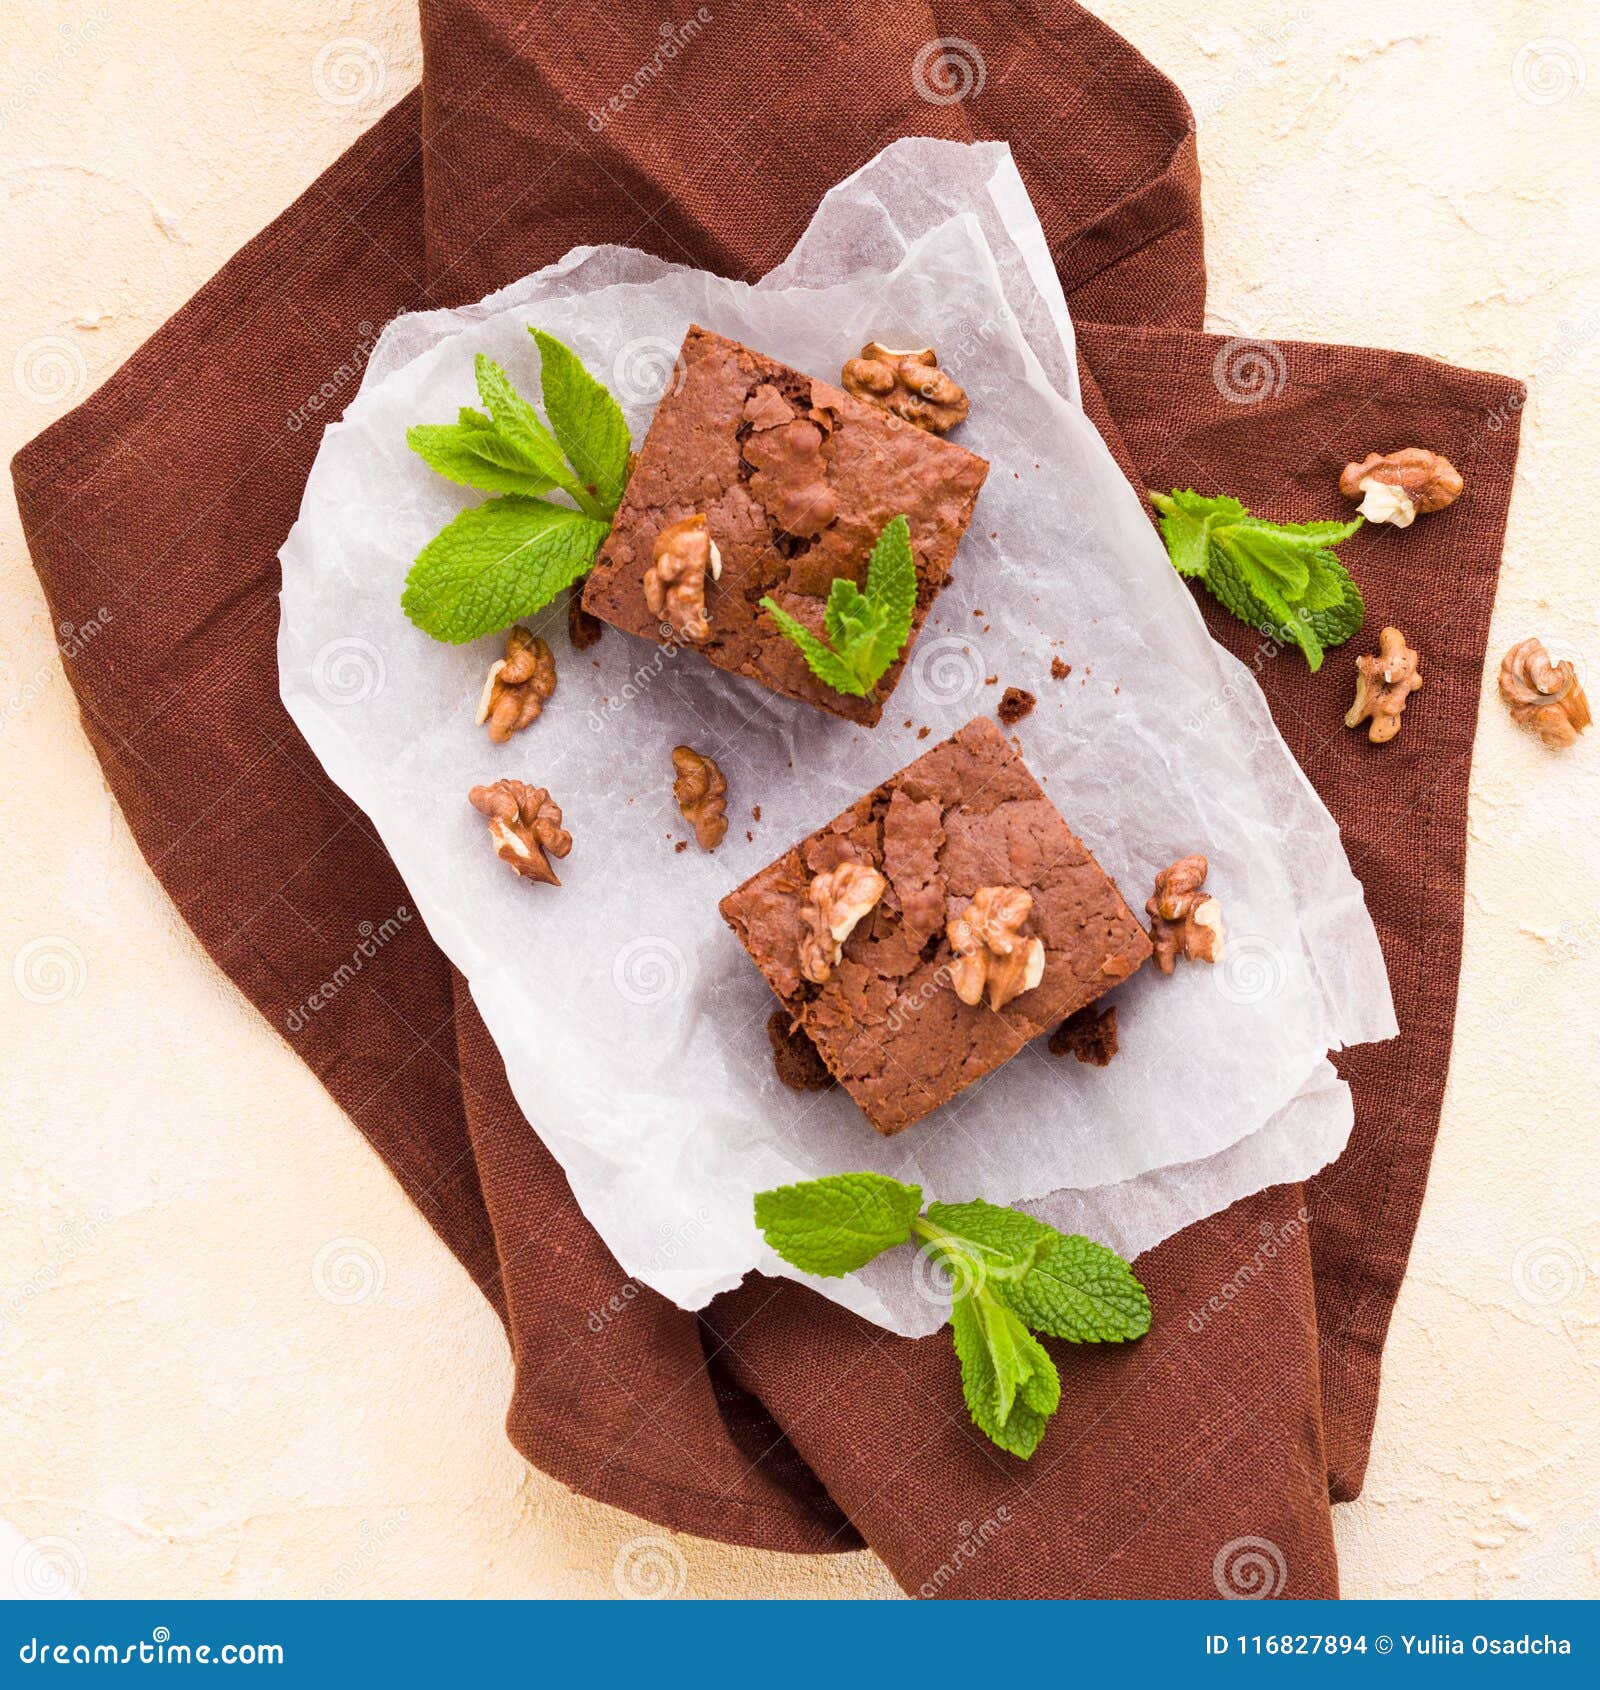 brownie sweet chocolate dessert with walnuts and meant leaves on white paper with copy space on pastel beige background.